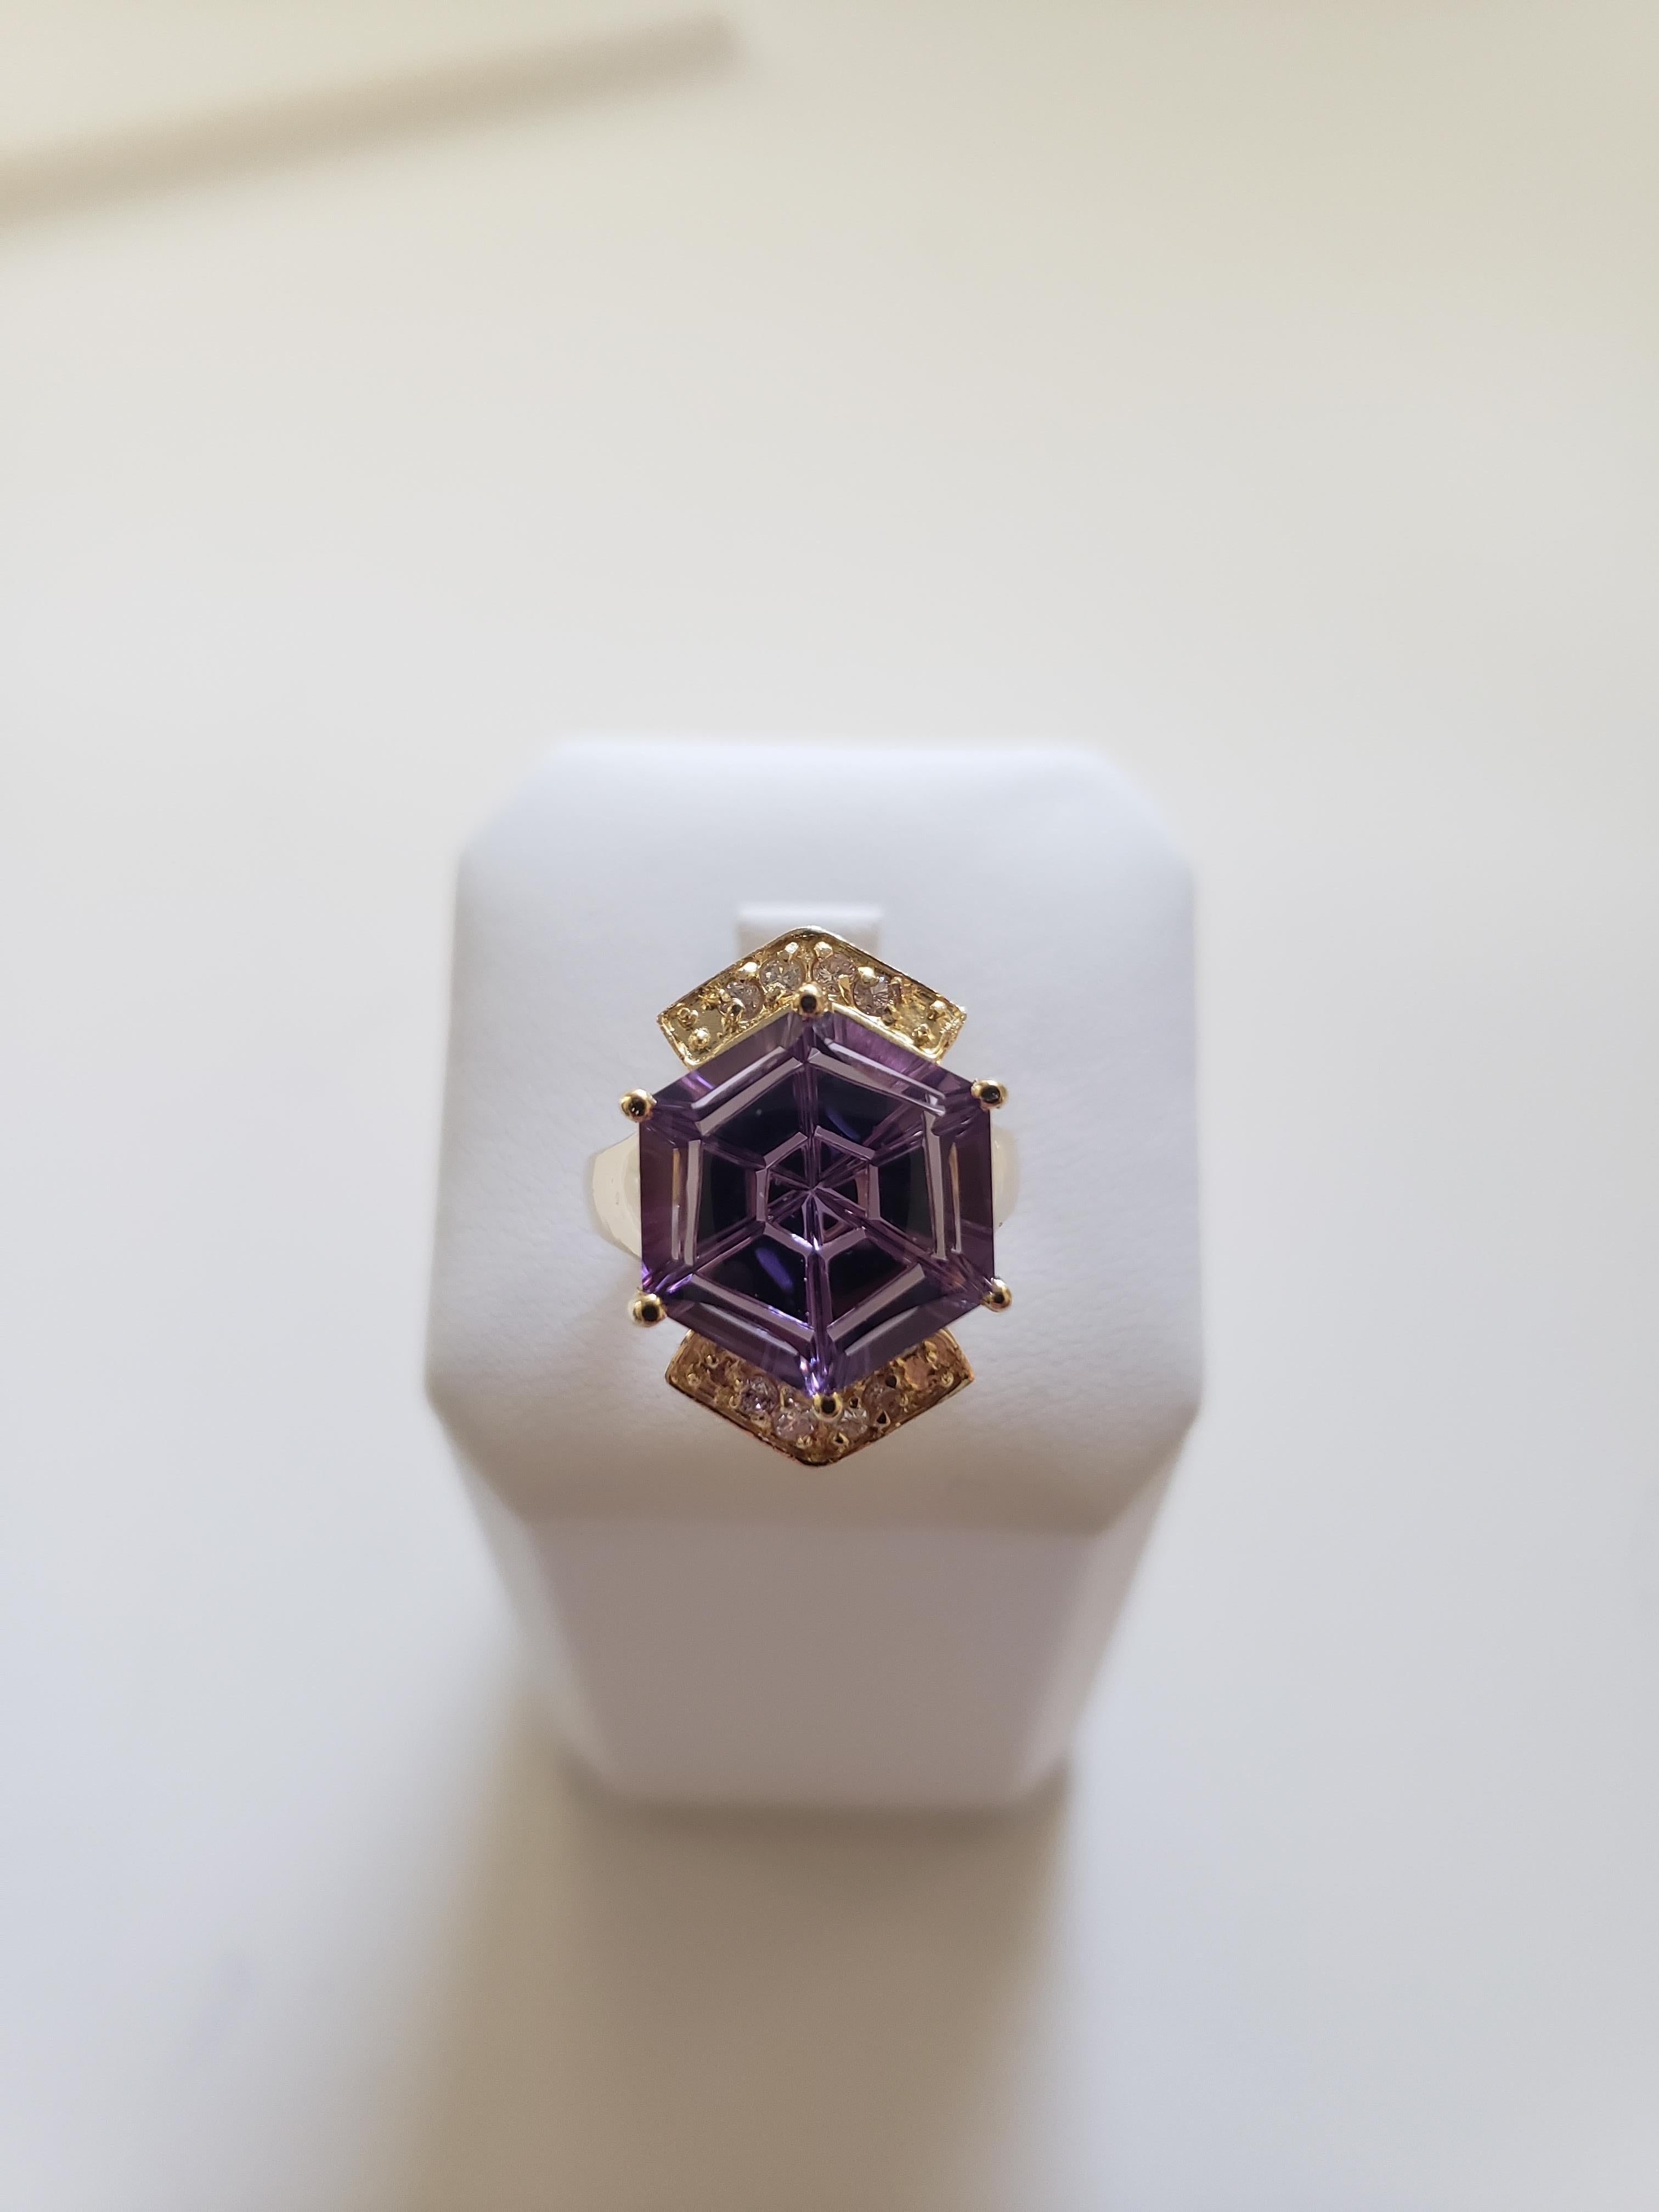 Enhance your jewelry collection with this stunning 14k yellow gold ring. Featuring a beautiful fantasy cut natural Natural Brazilian AAAA Quality VVS Clarity amethyst stone, this ring boasts a total weight of 8 carats. The amethyst stone is